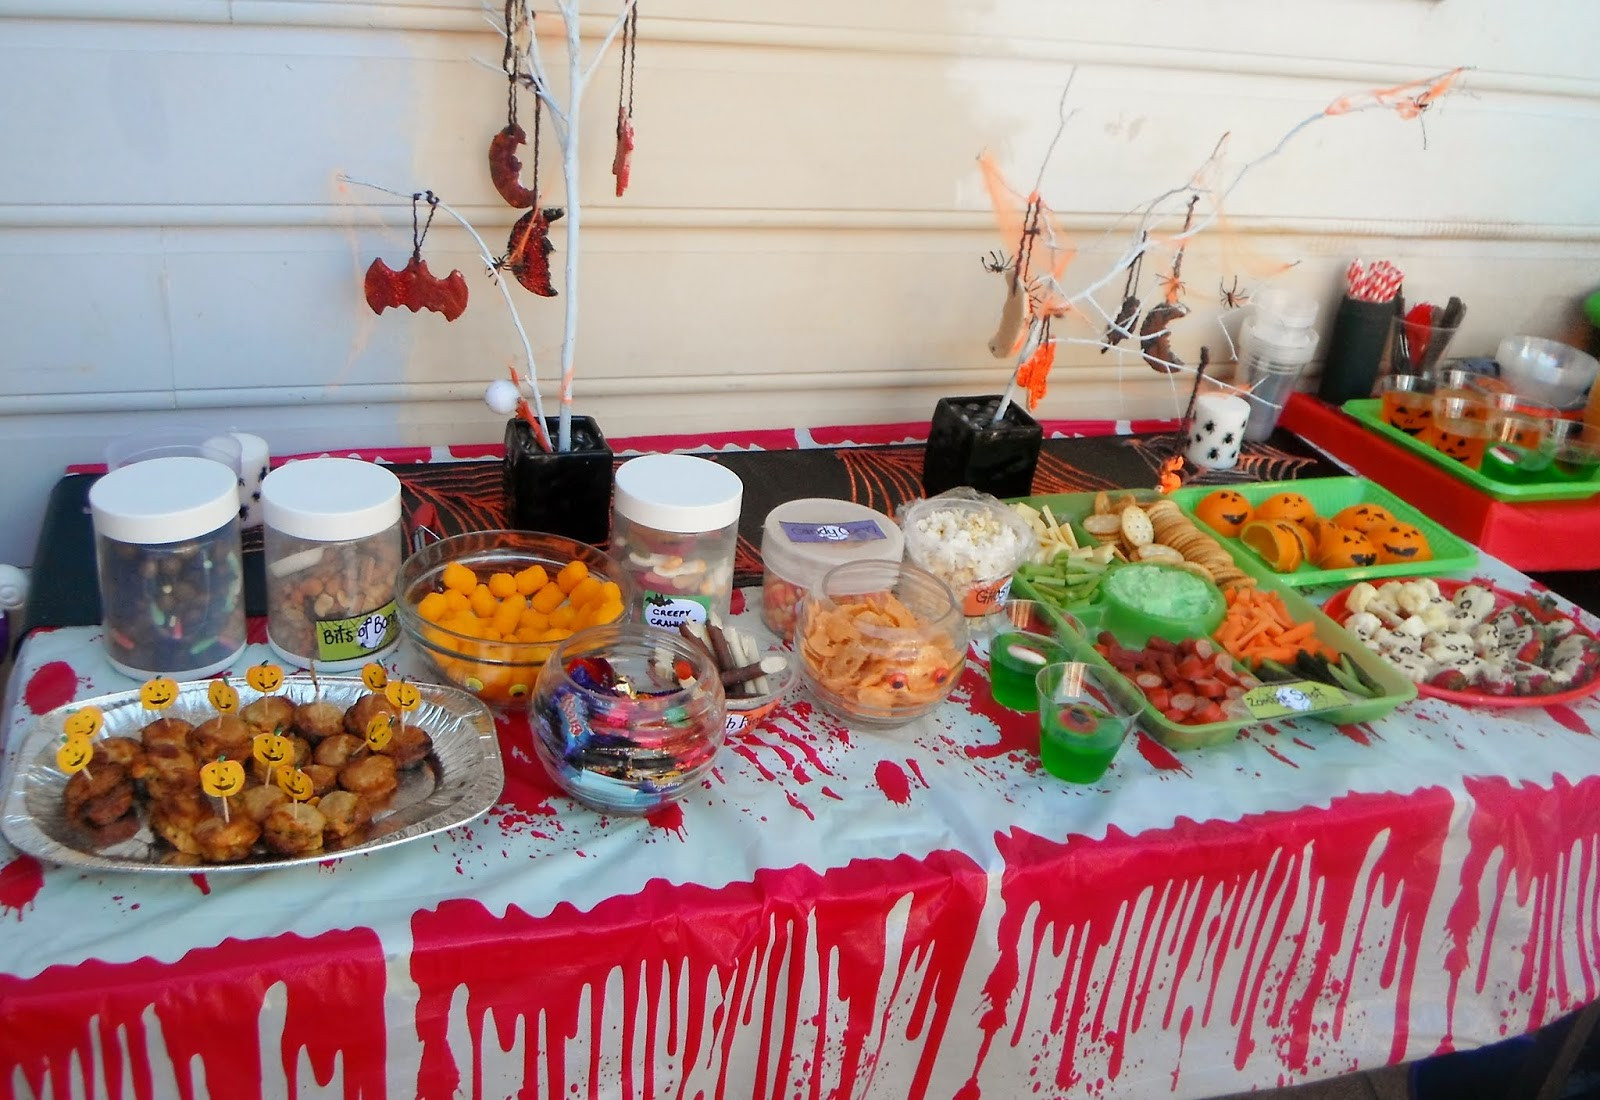 Halloween Party Foods Ideas
 Adventures at home with Mum Halloween Party Food